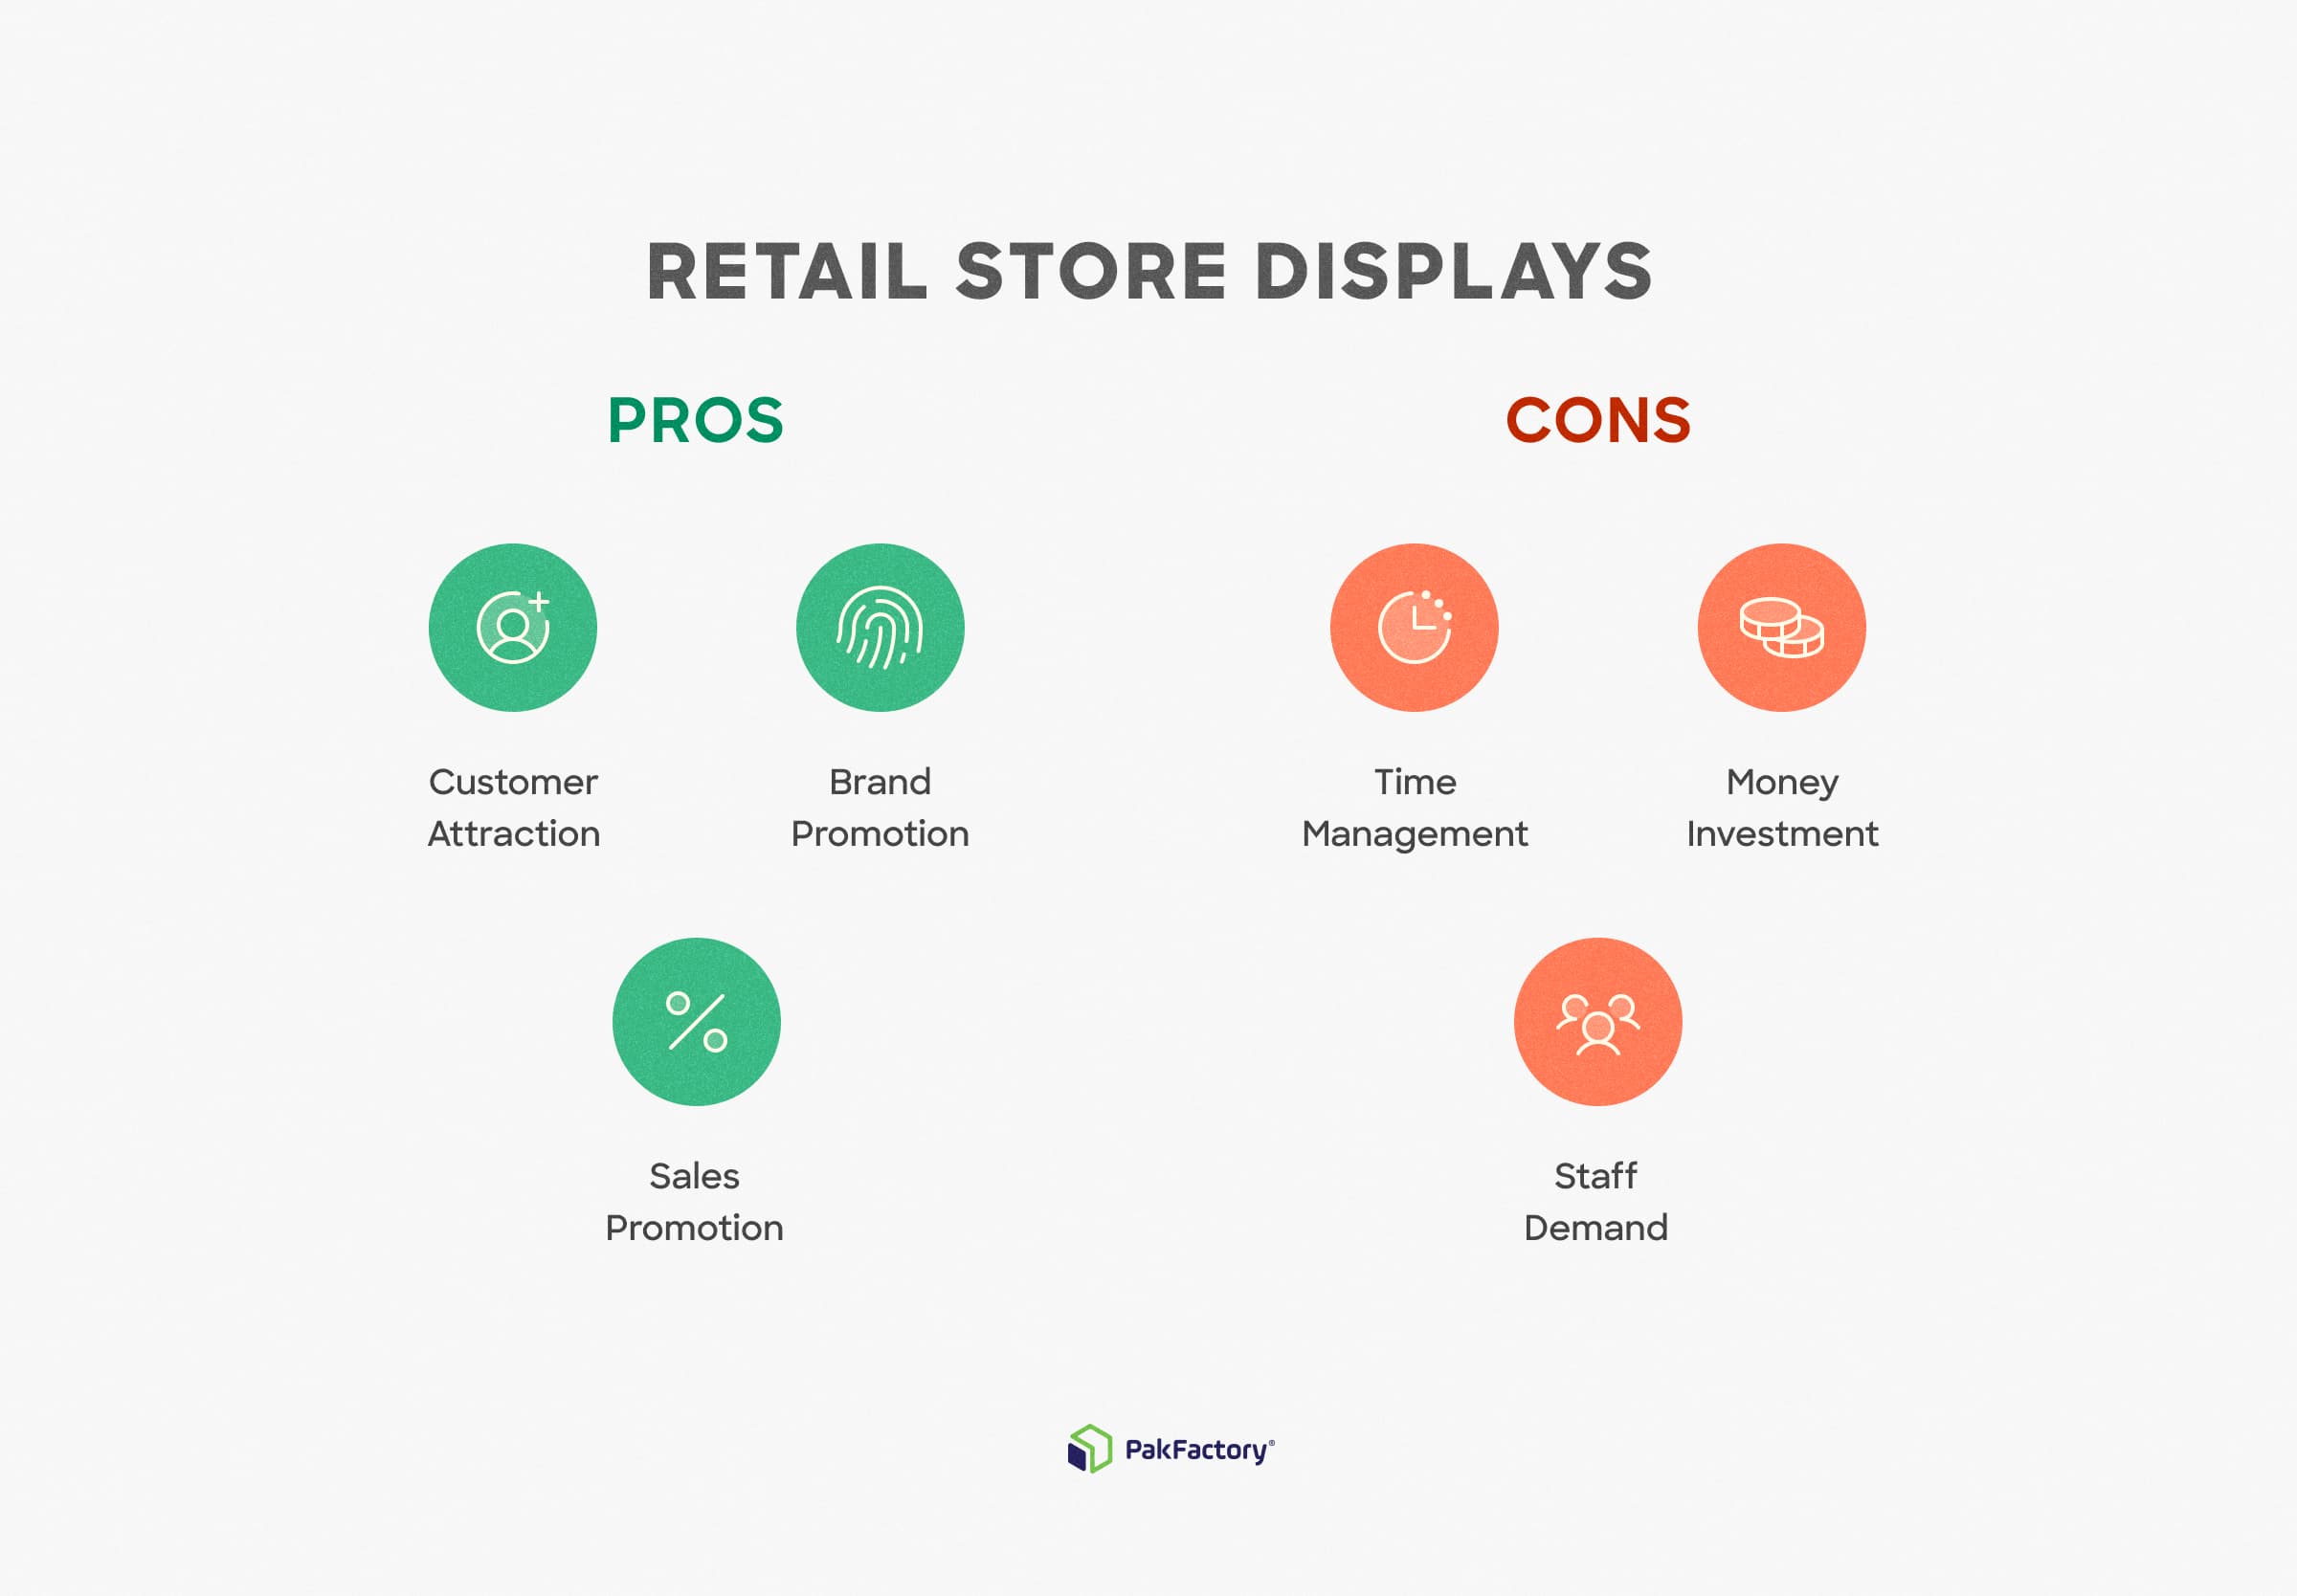 pros and cons of retail store displays